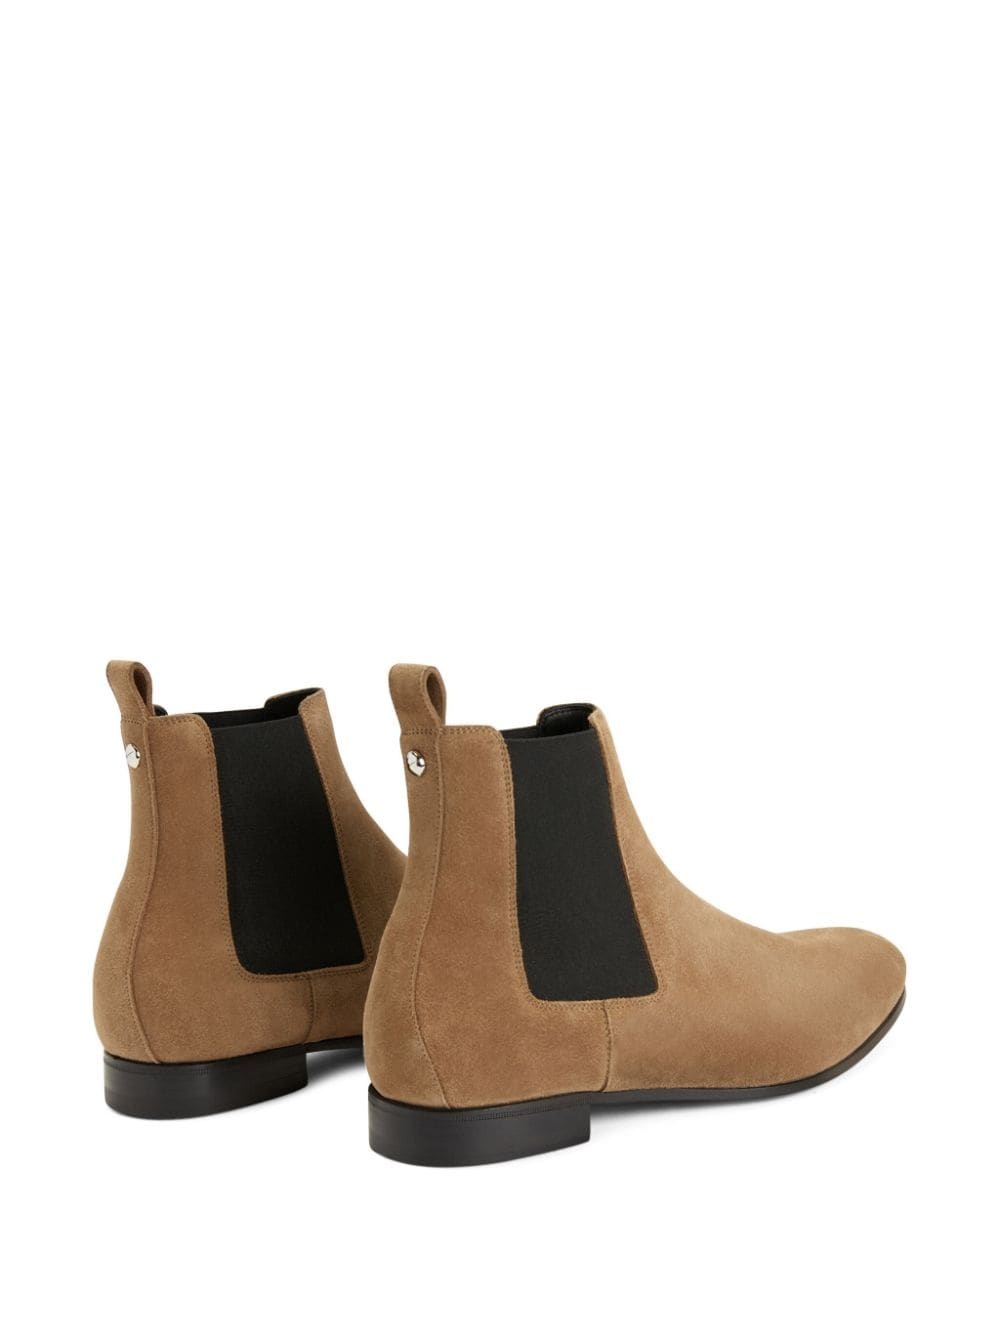 Eligio suede ankle boots - 3